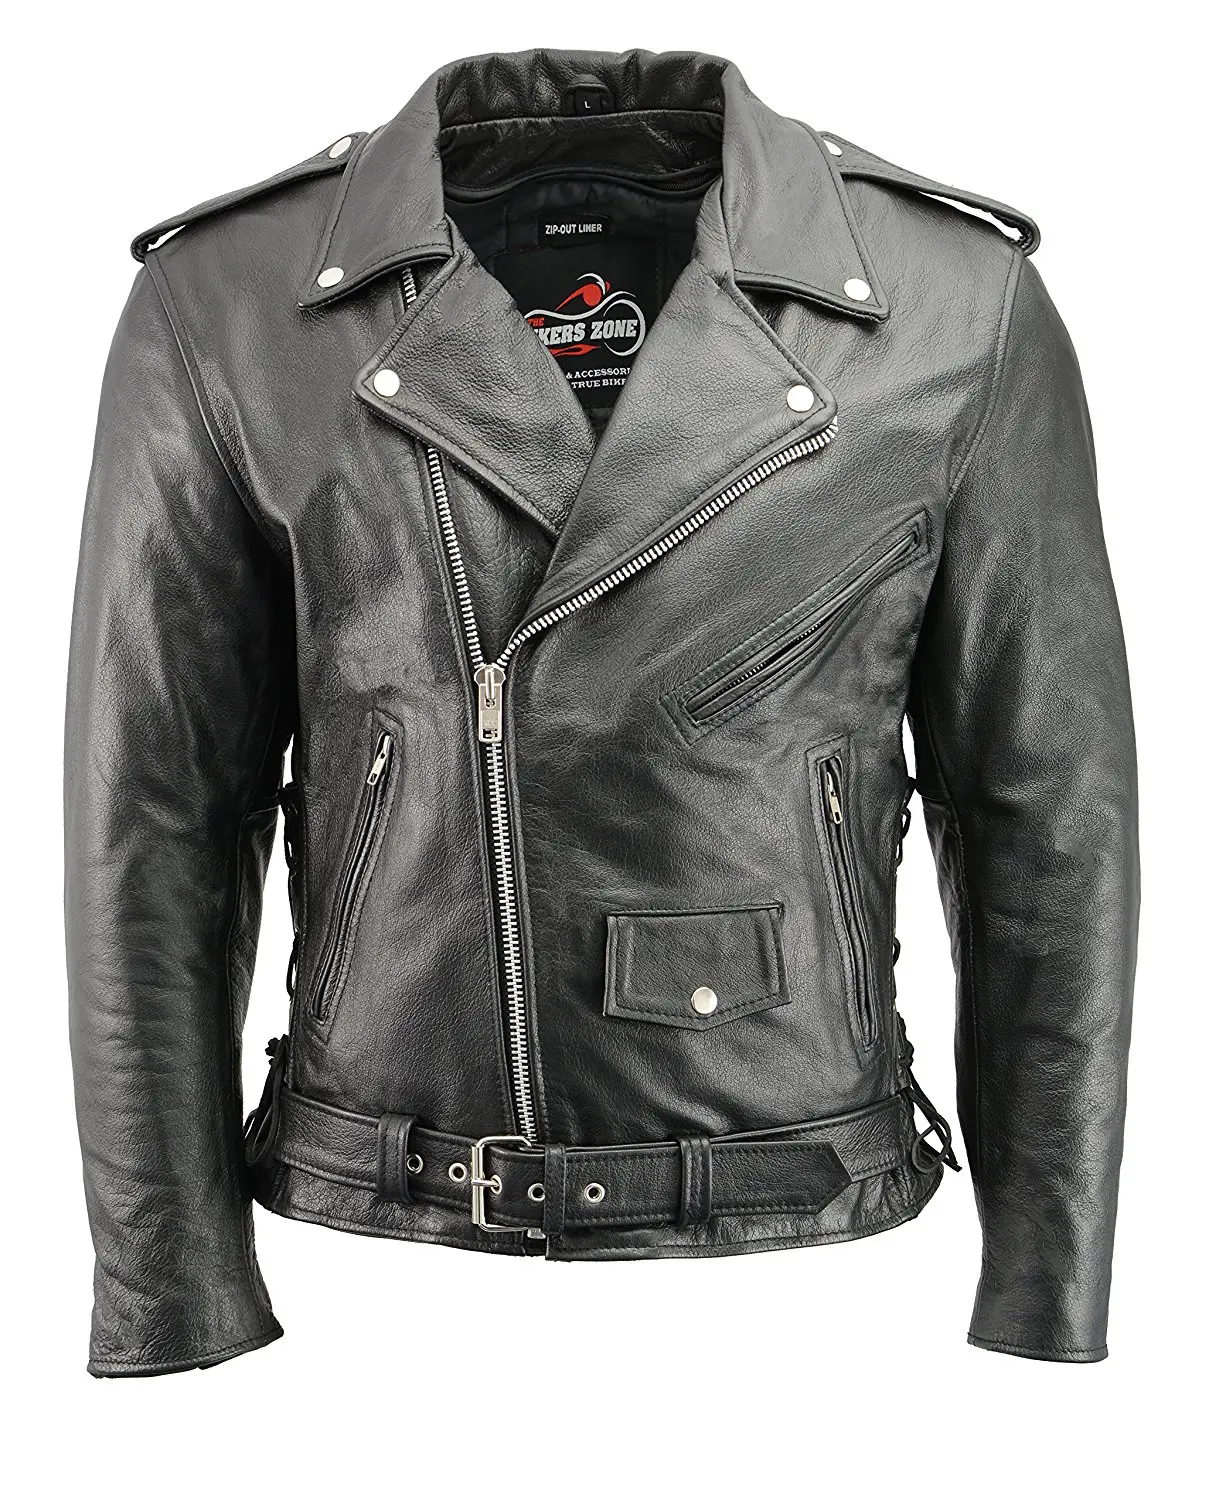 Buy Men’s Leather Motorcycle Jacket with CE Certified Armor | Premium ...